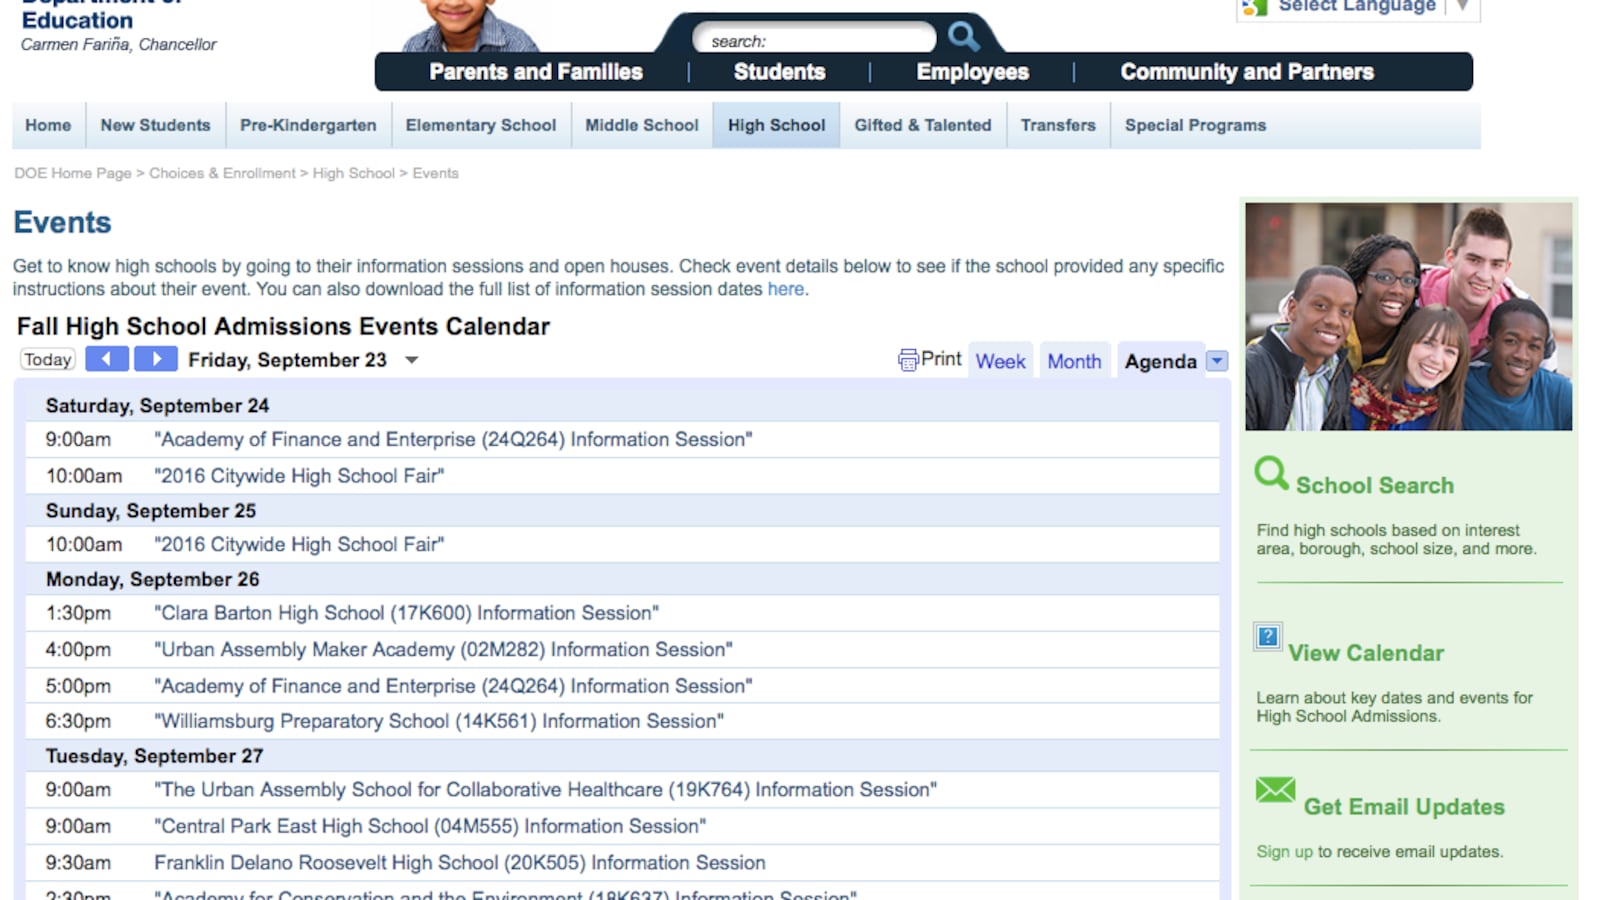 The Department of Education's high school admissions events calendar.